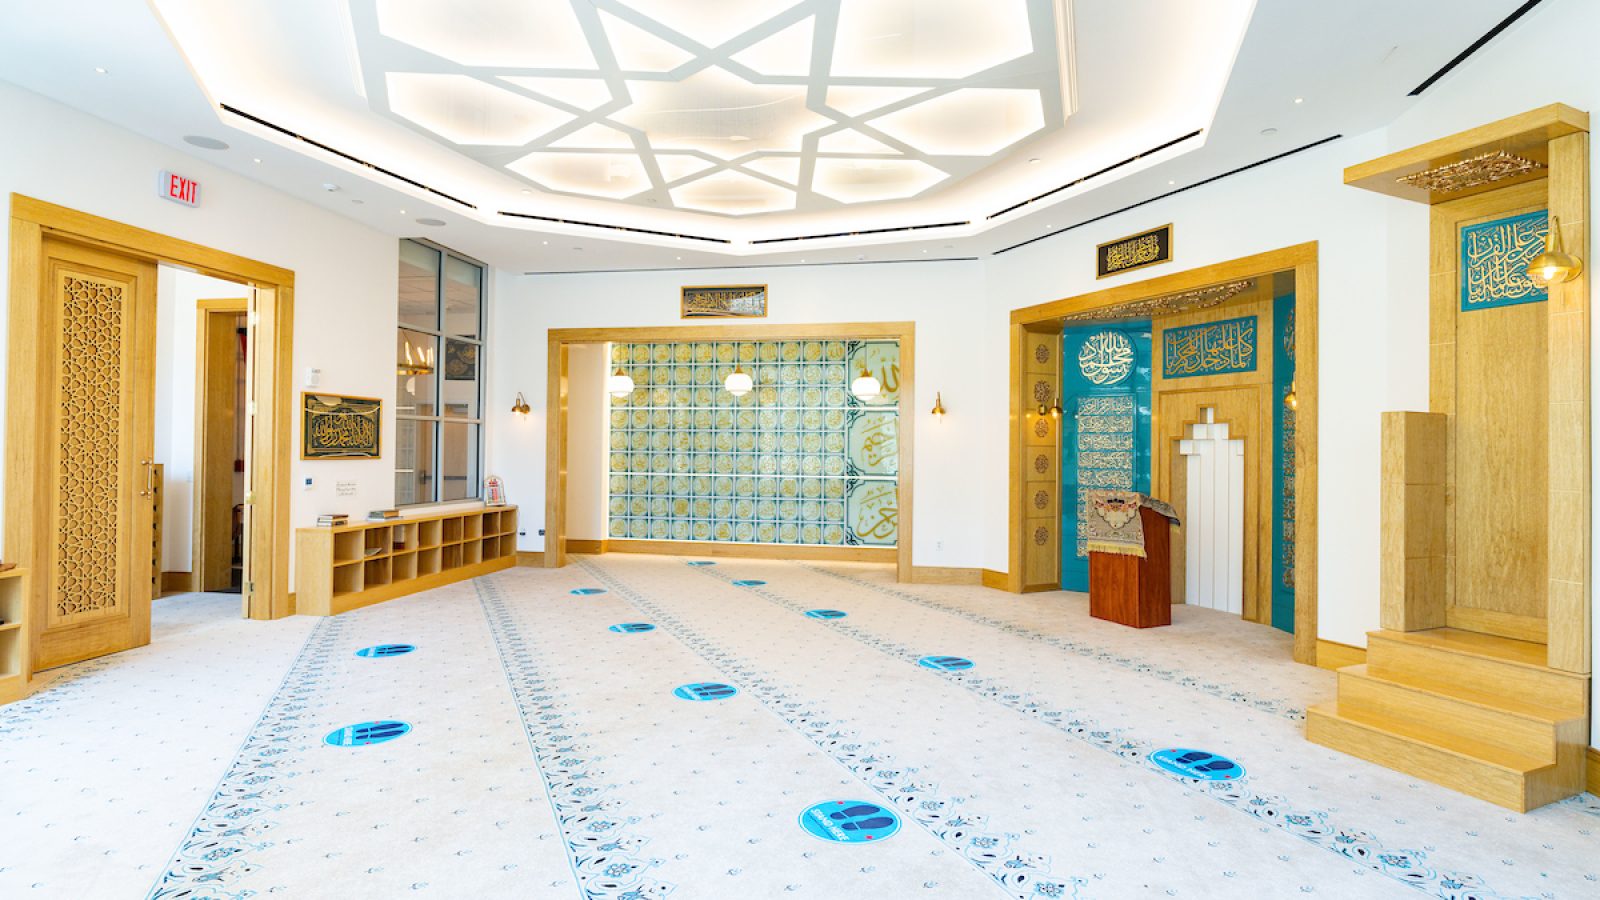 Inside the Yarrow Mamout Masjid the walls are lined with decorative gold and teal blue decor